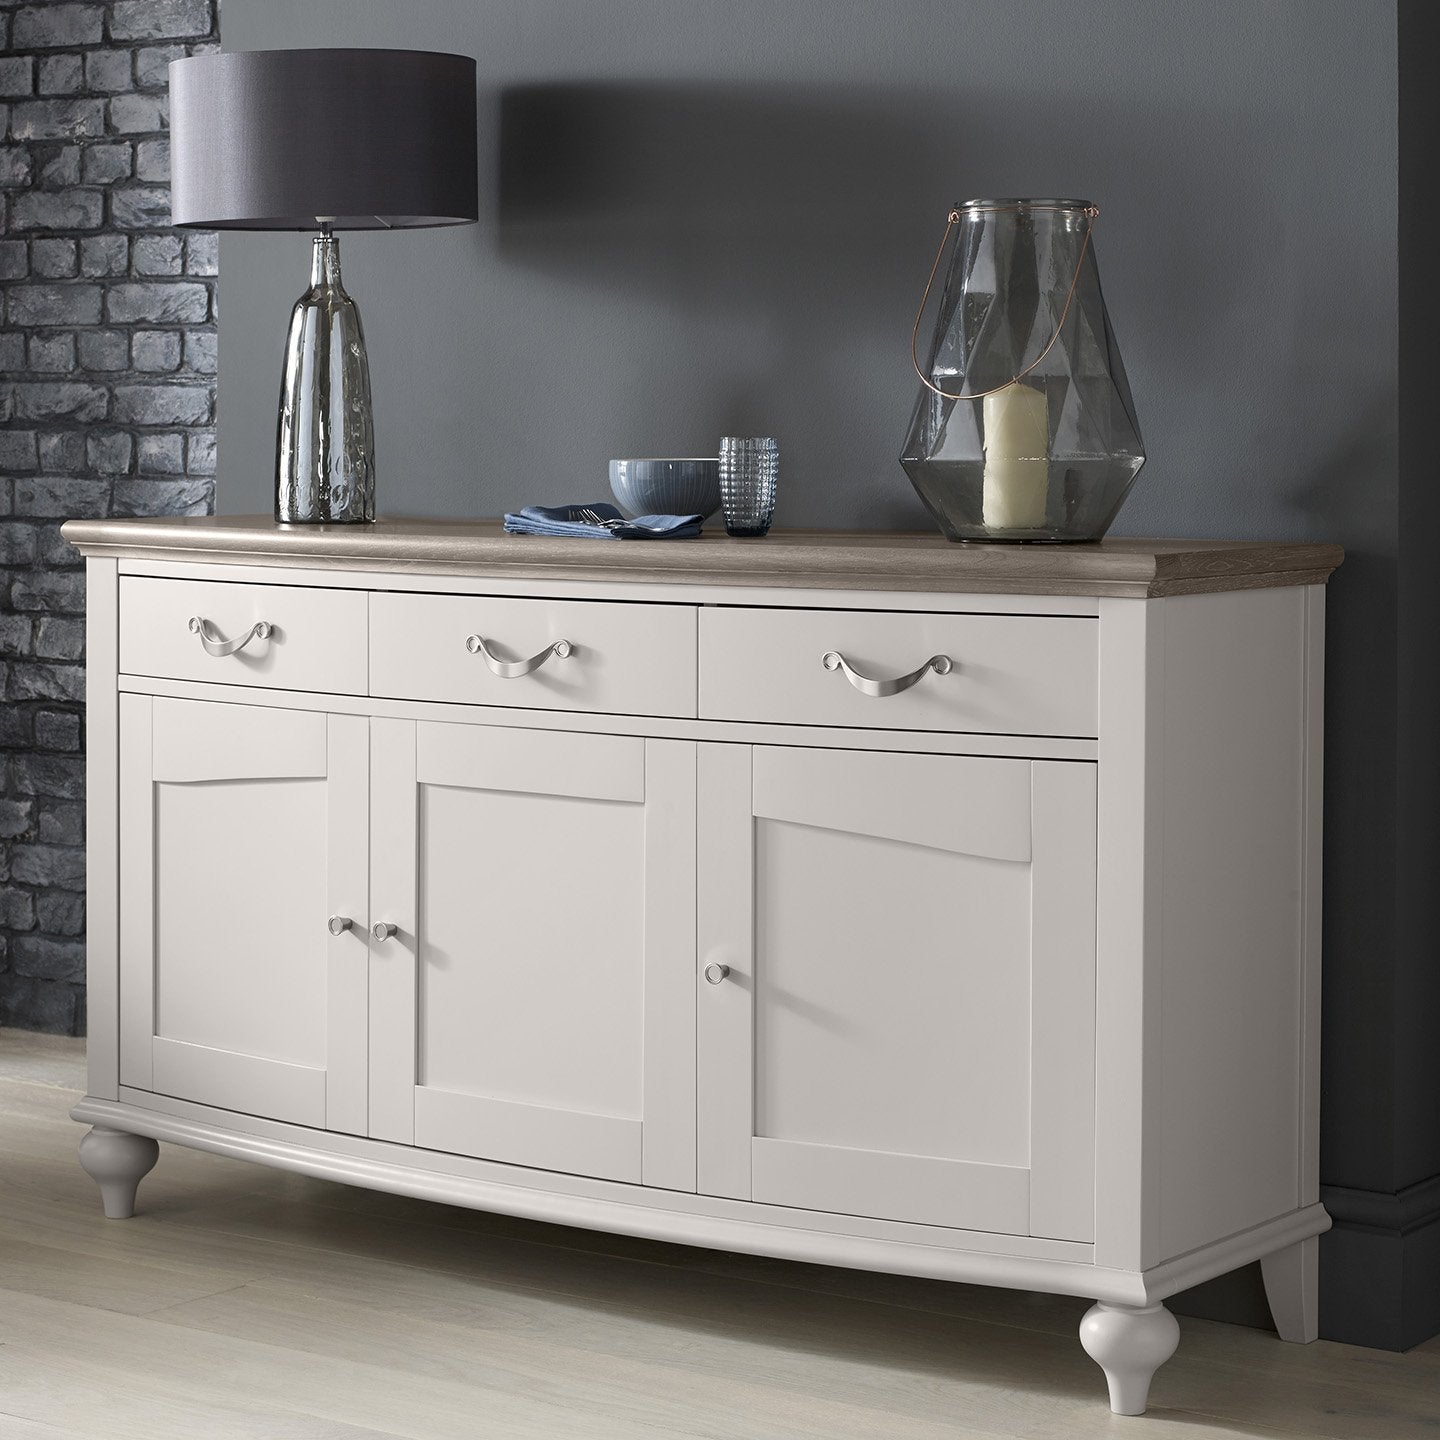 Montreux Large Sideboard - Soft Grey from Upstairs Downstairs Furniture in Lisburn, Monaghan and Enniskillen